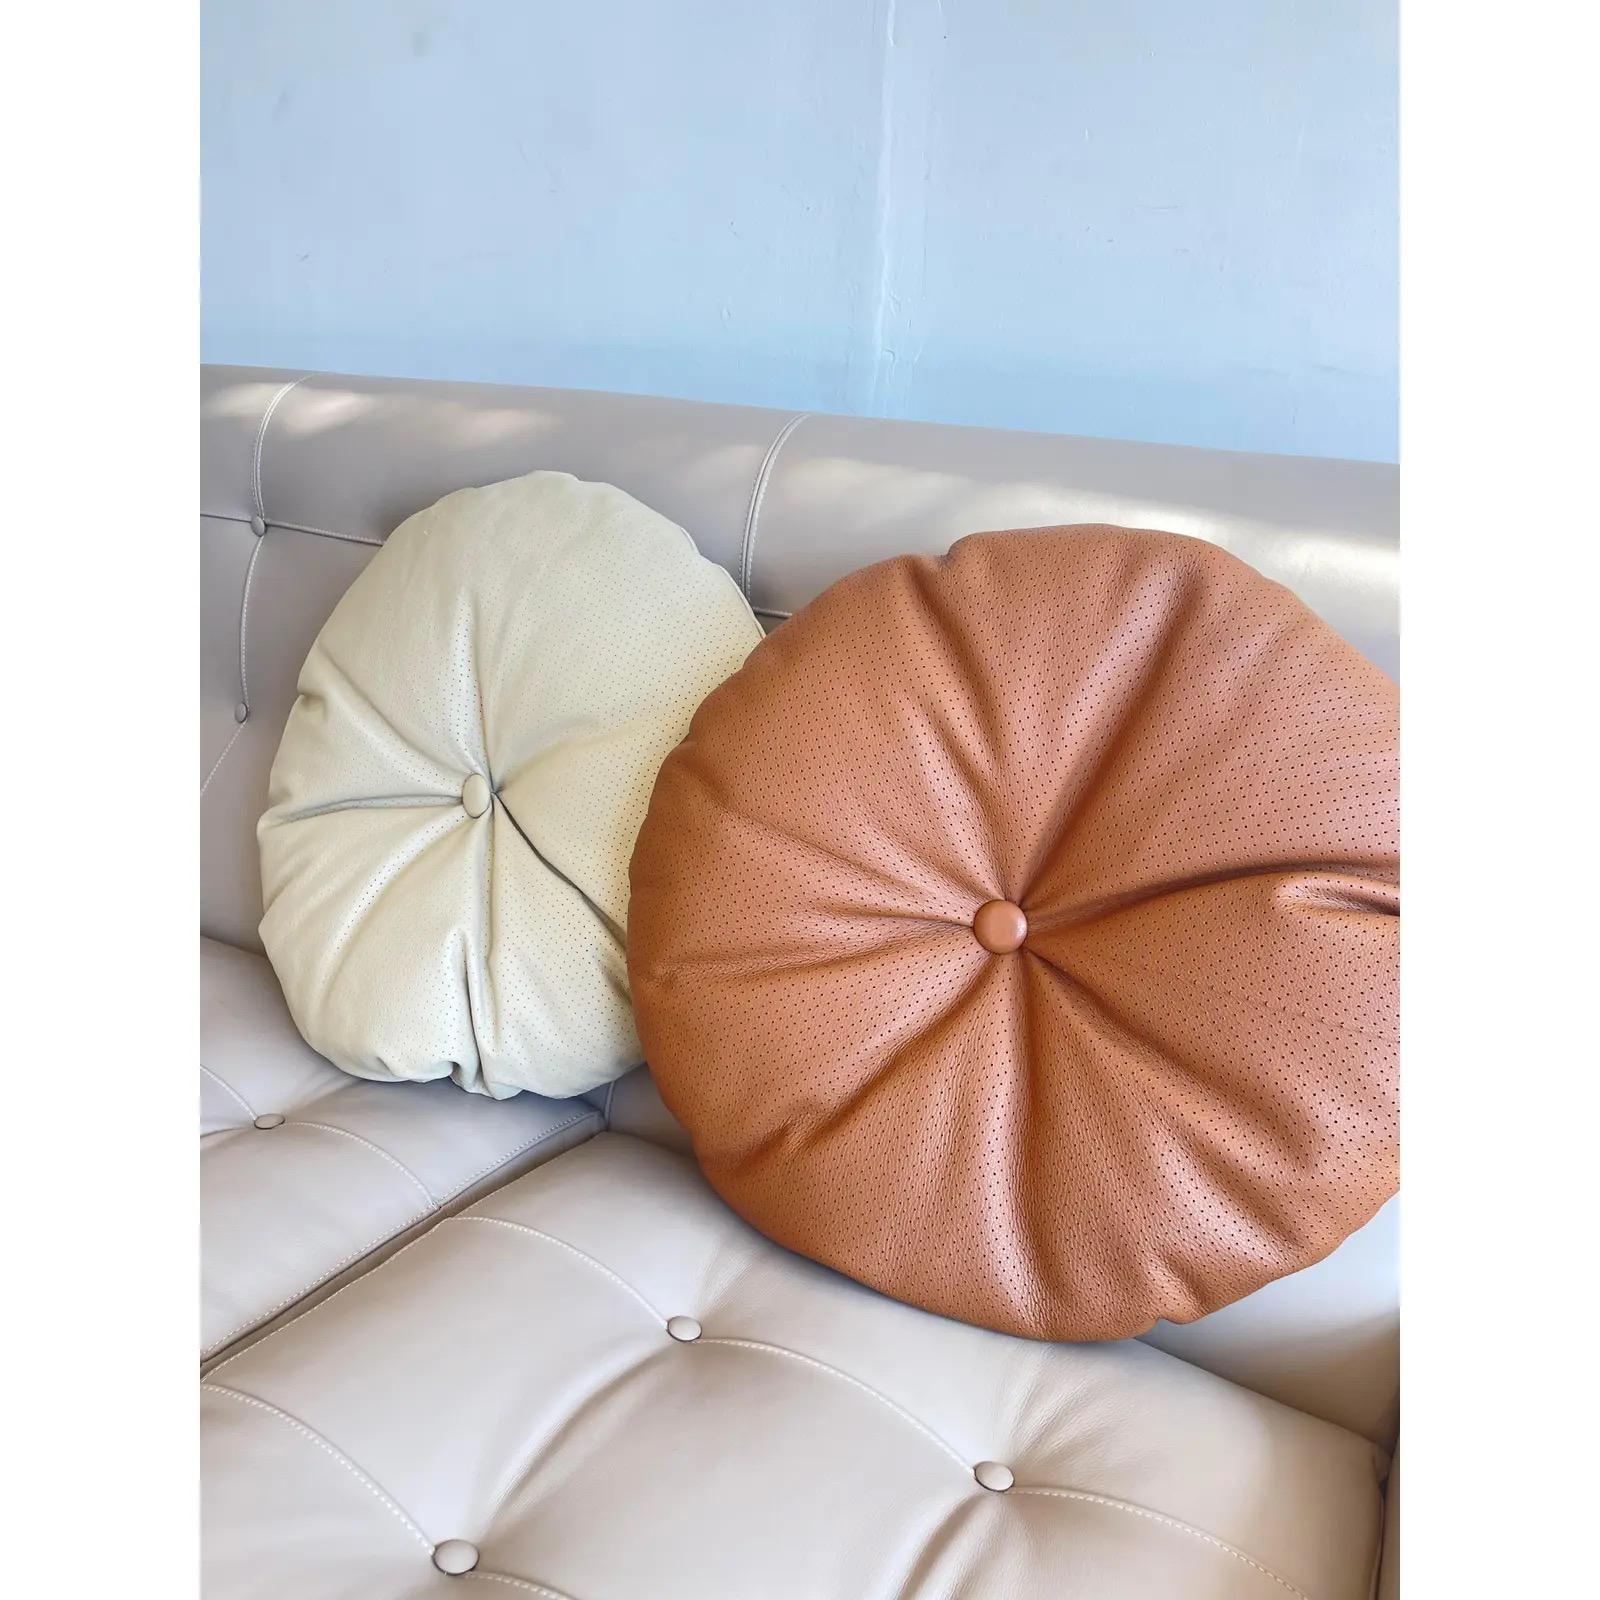 Introducing a luxurious and high-quality addition to your decor, the Arflex Extra Large Round Leather Decorative Pillow. Crafted by the esteemed Italian Furniture Brand, this exquisite pillow boasts a generous 21.65